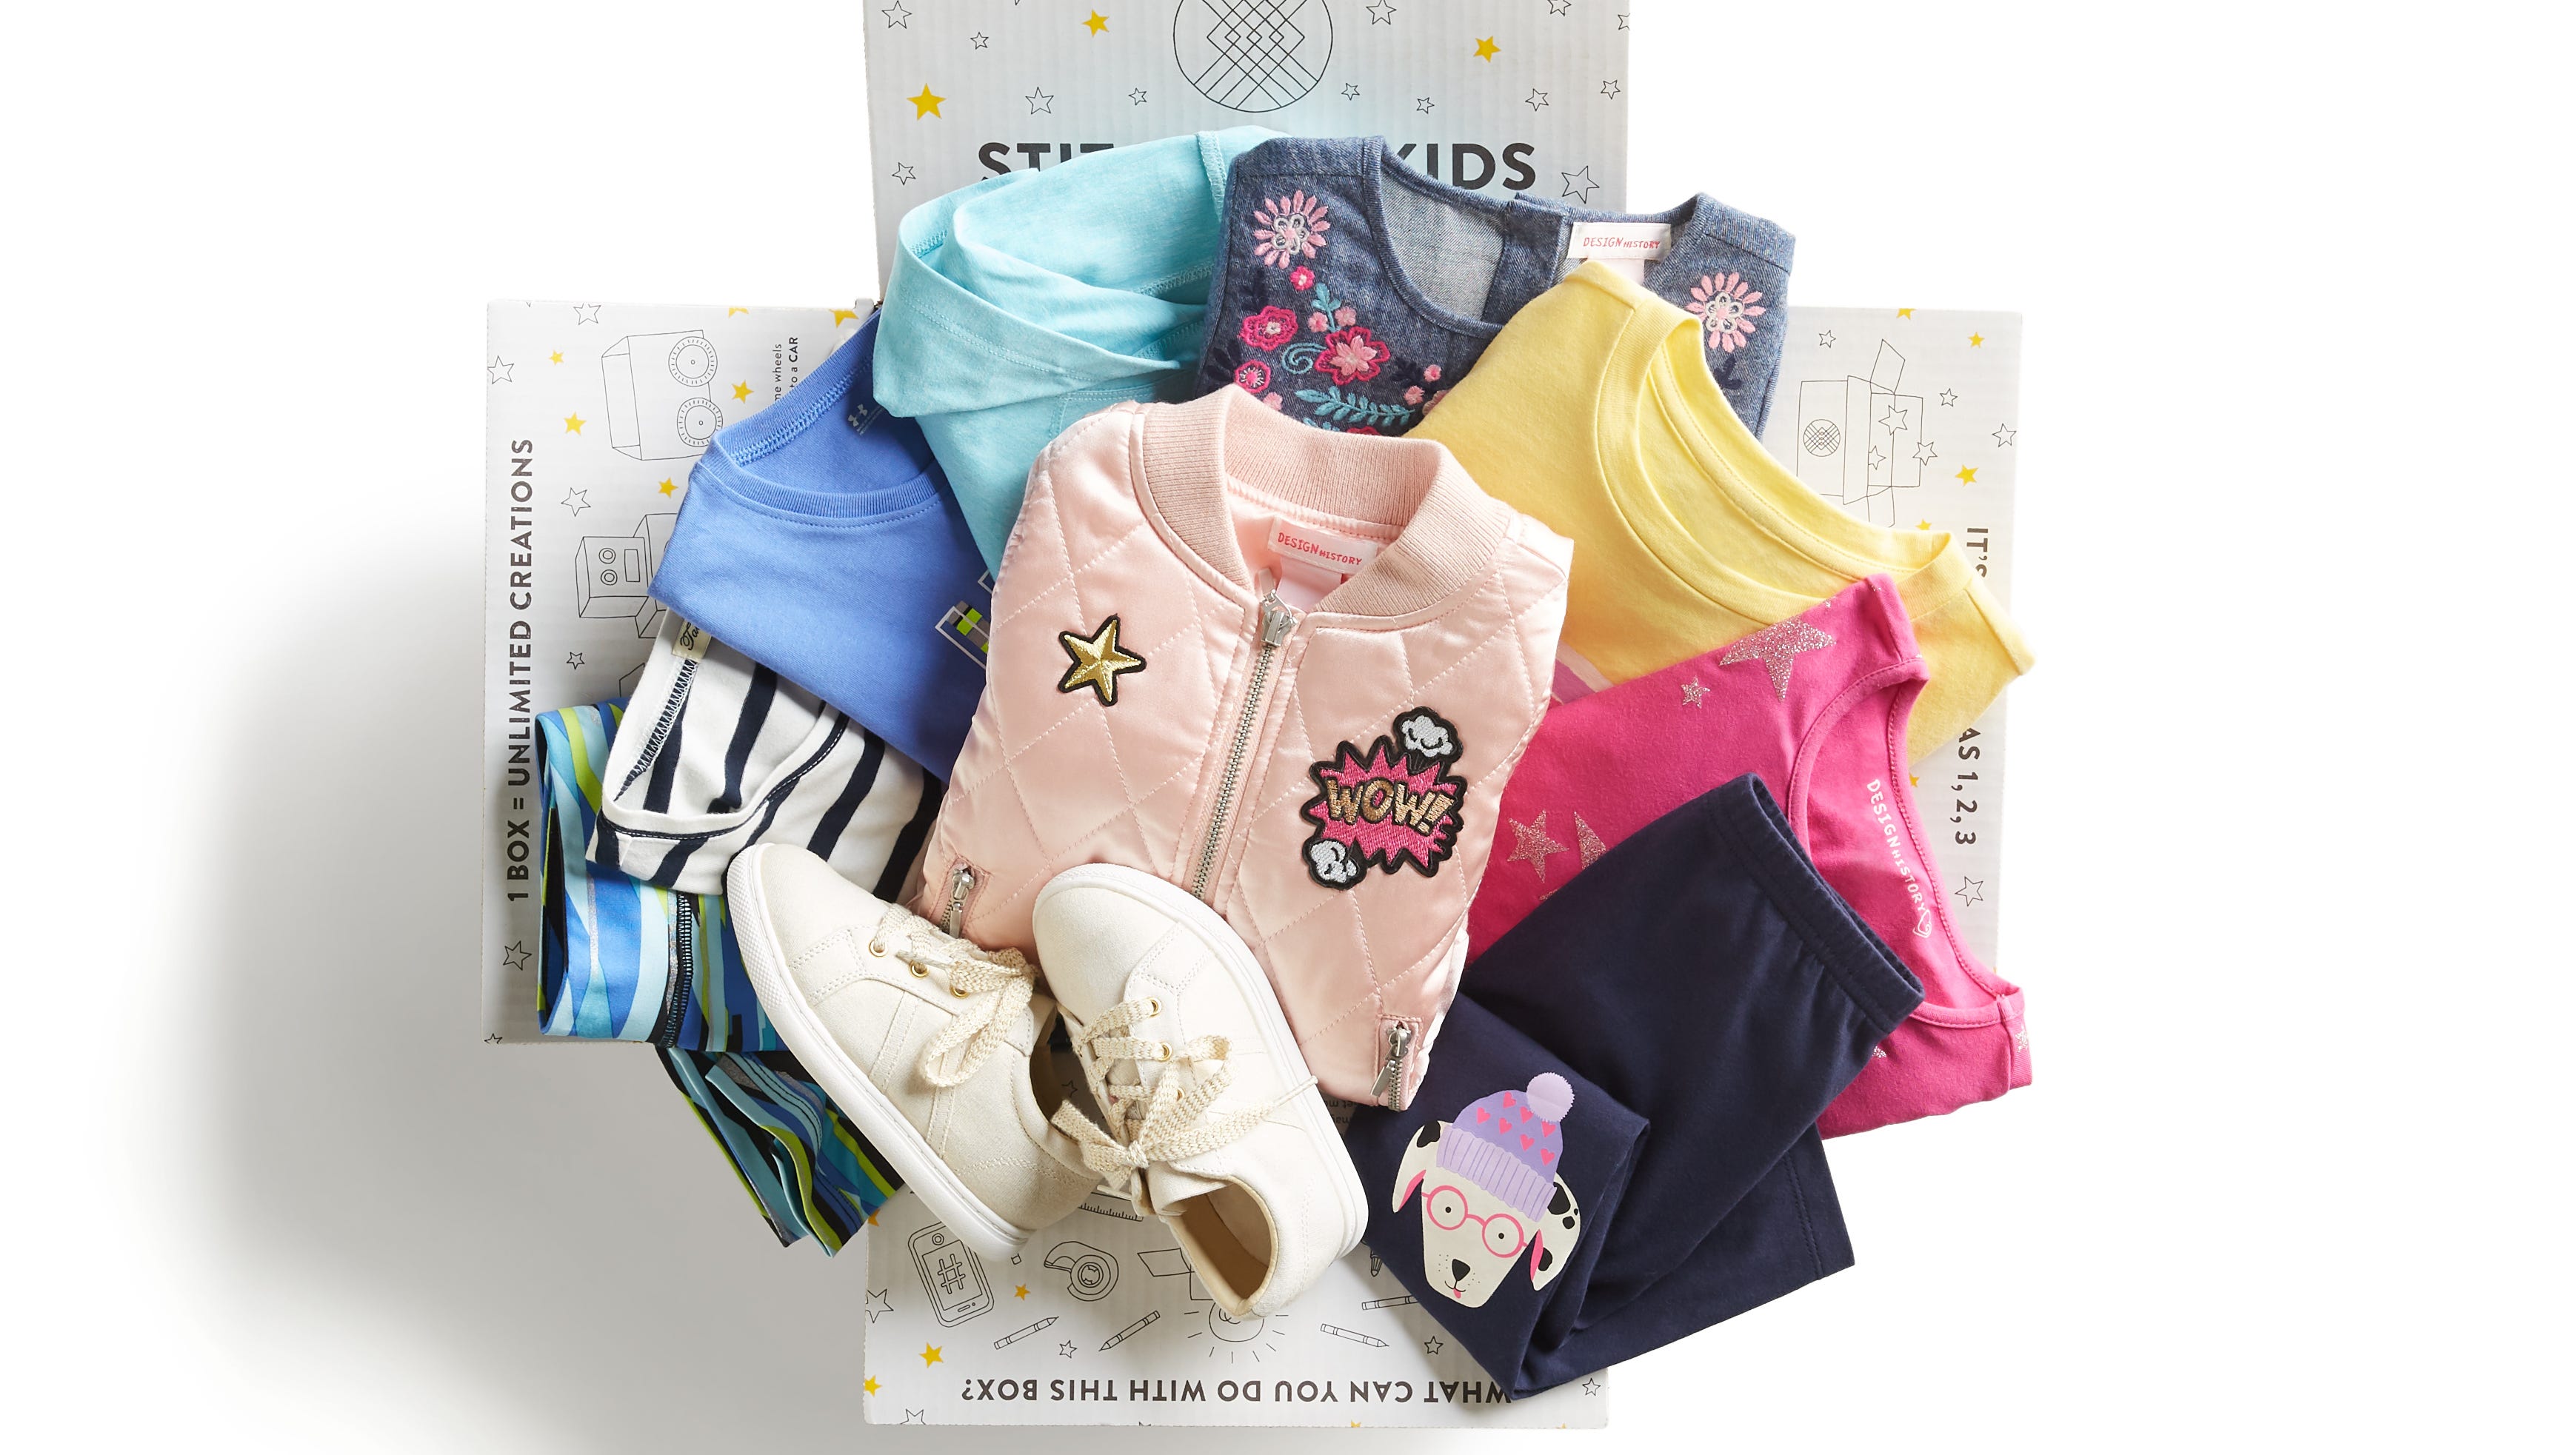 childrens clothing subscription boxes